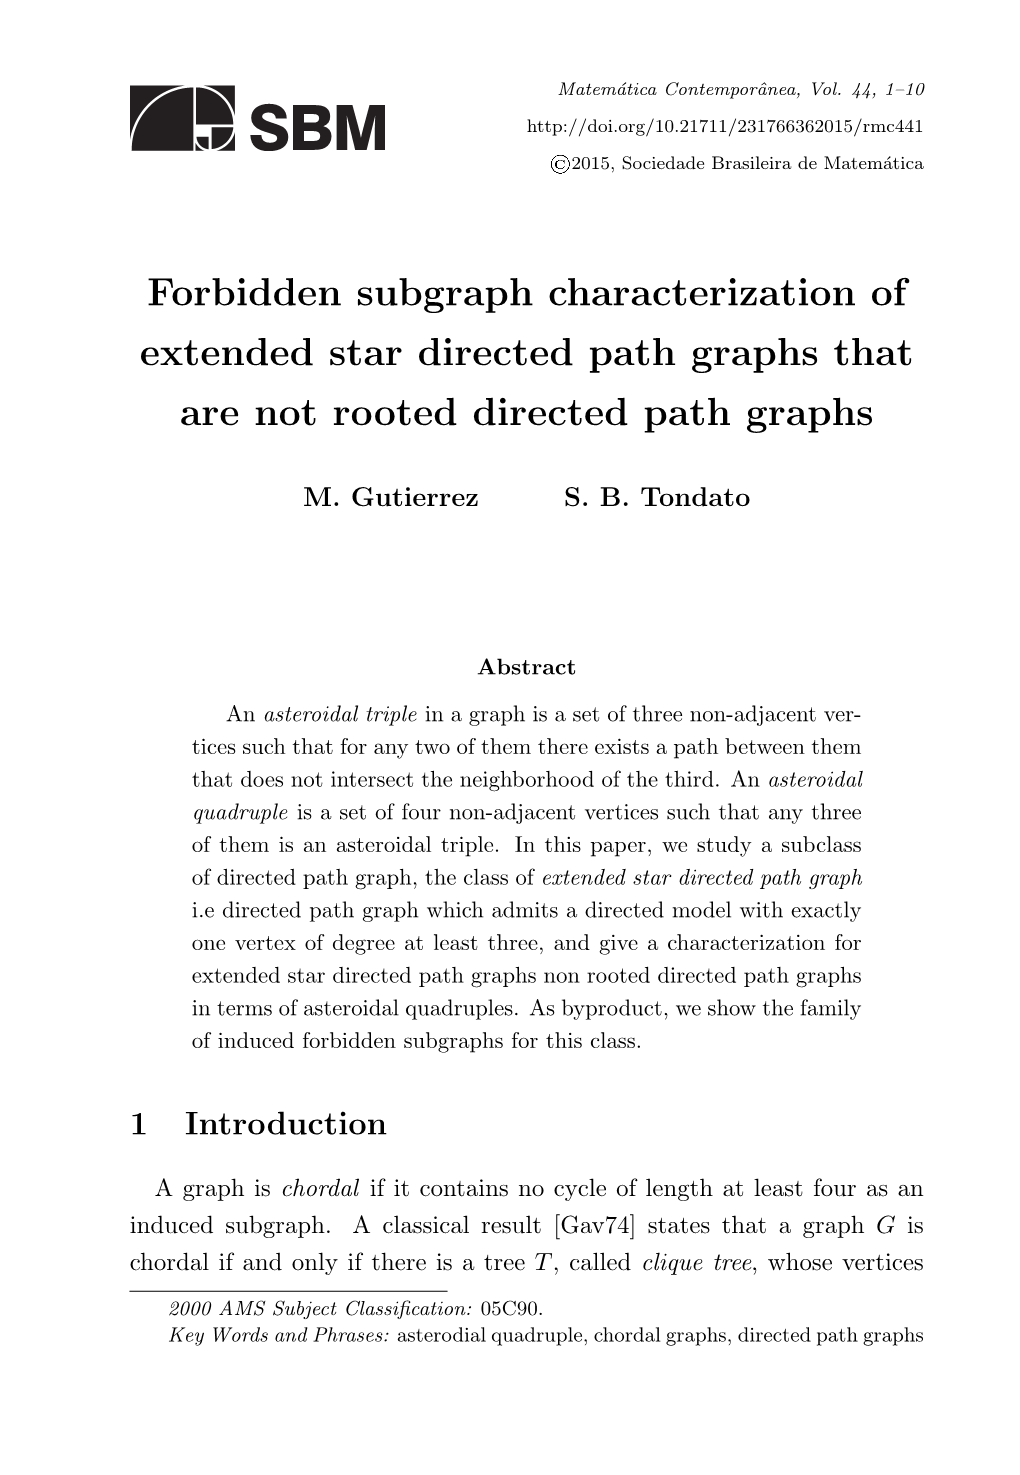 Forbidden Subgraph Characterization of Extended Star Directed Path Graphs That Are Not Rooted Directed Path Graphs